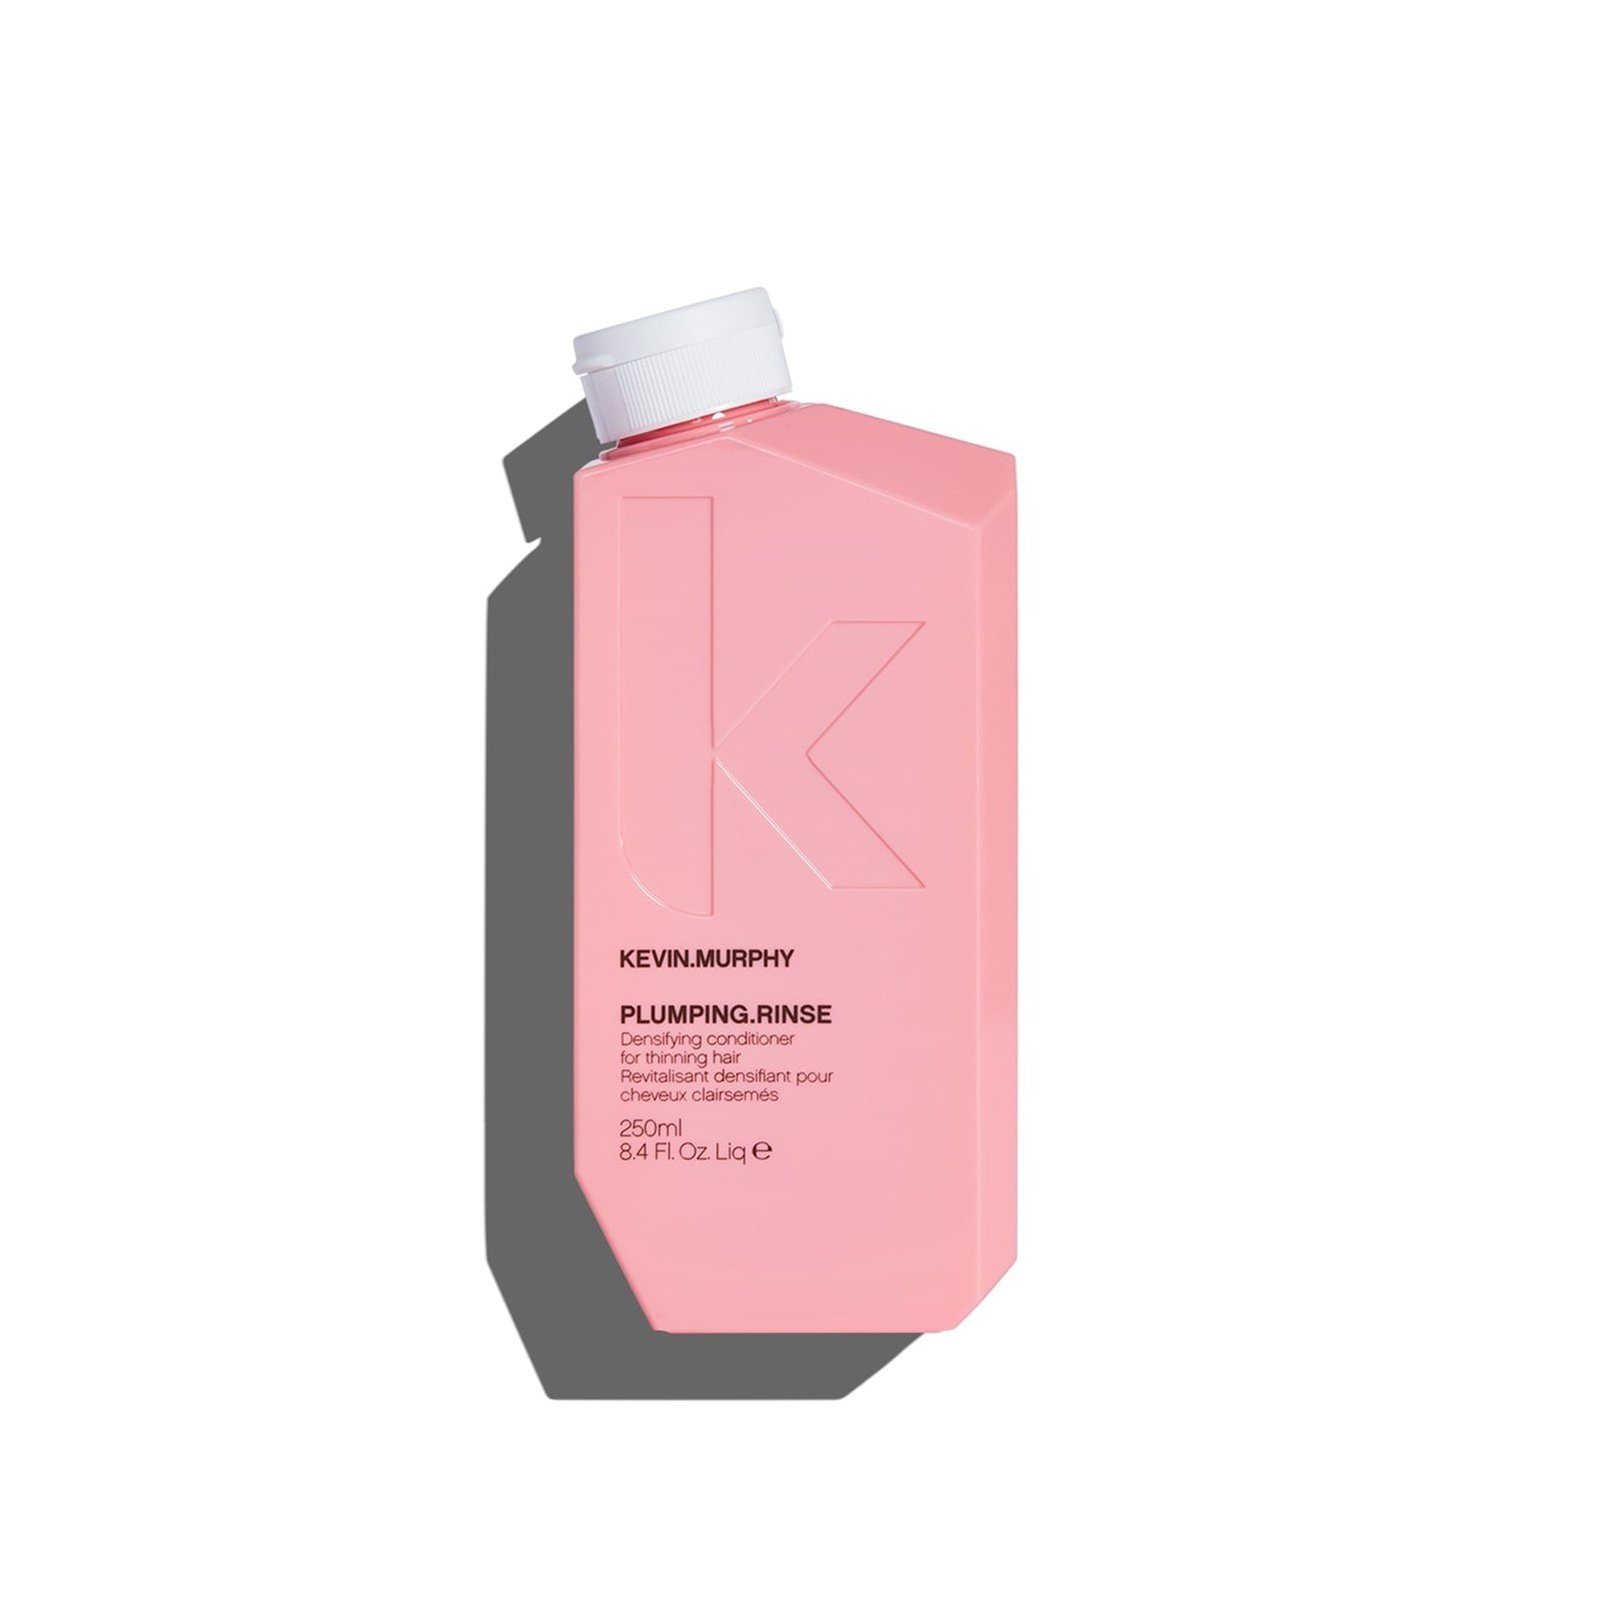 Kevin Murphy Plumping Rinse Conditioner 250ml (8.4 fl oz)